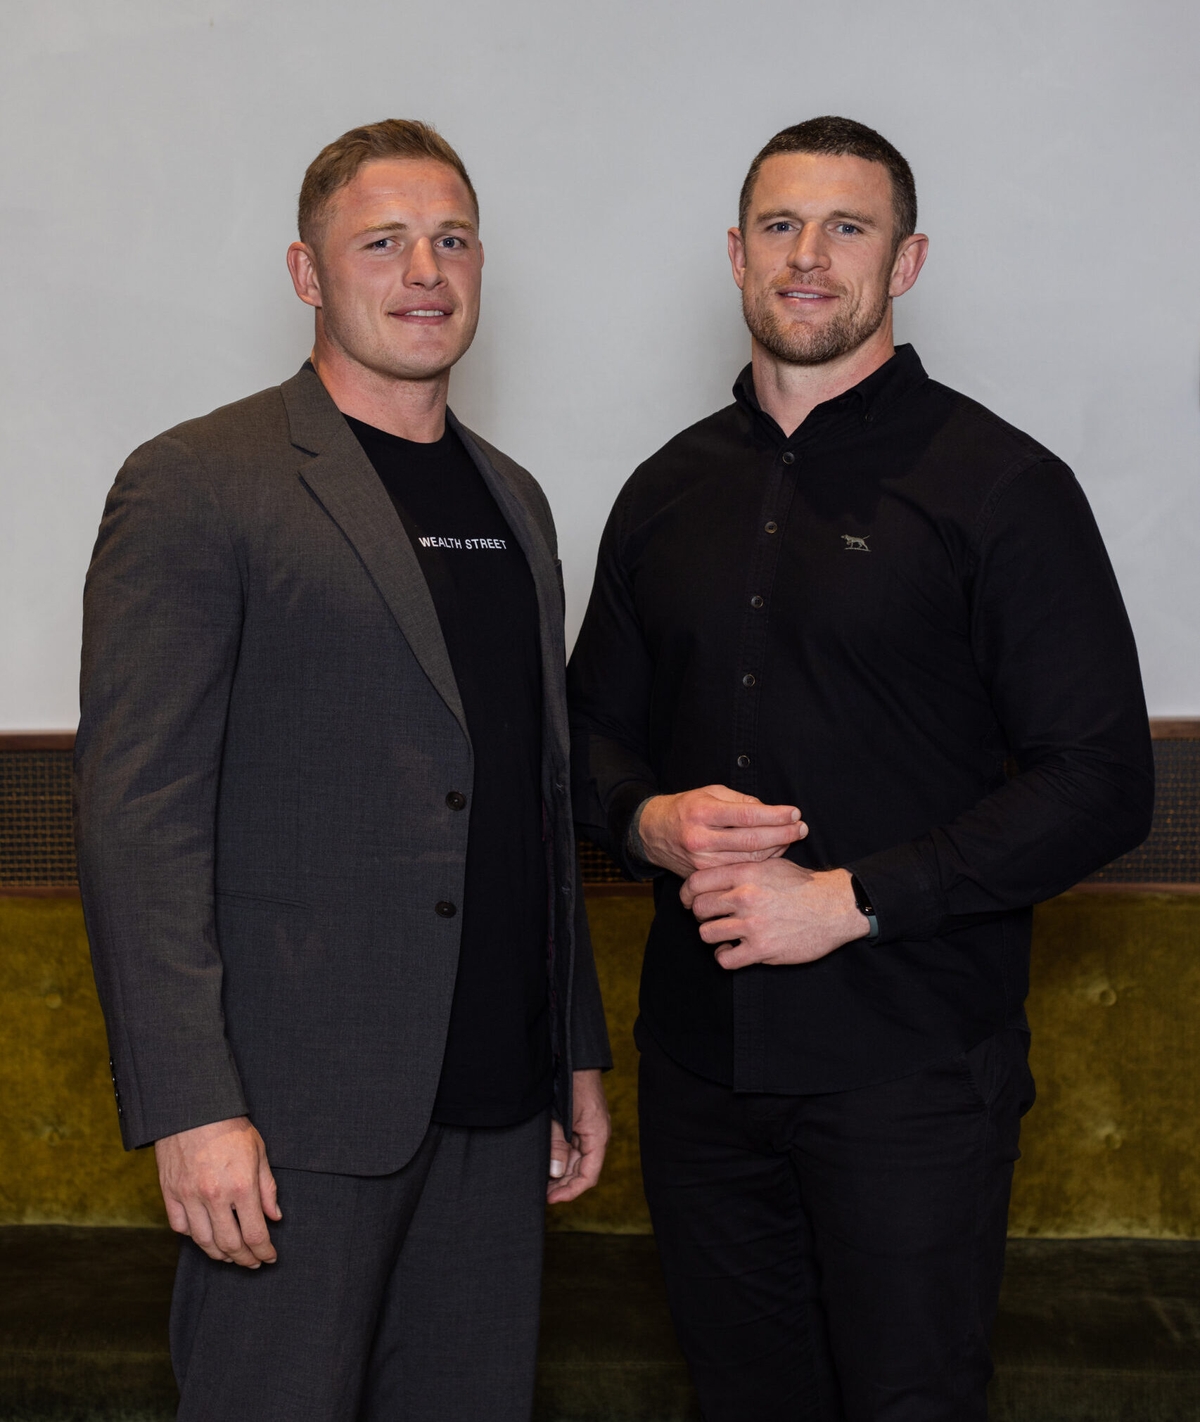 From the rugby pitch to property: George Burgess joins Wealth Street